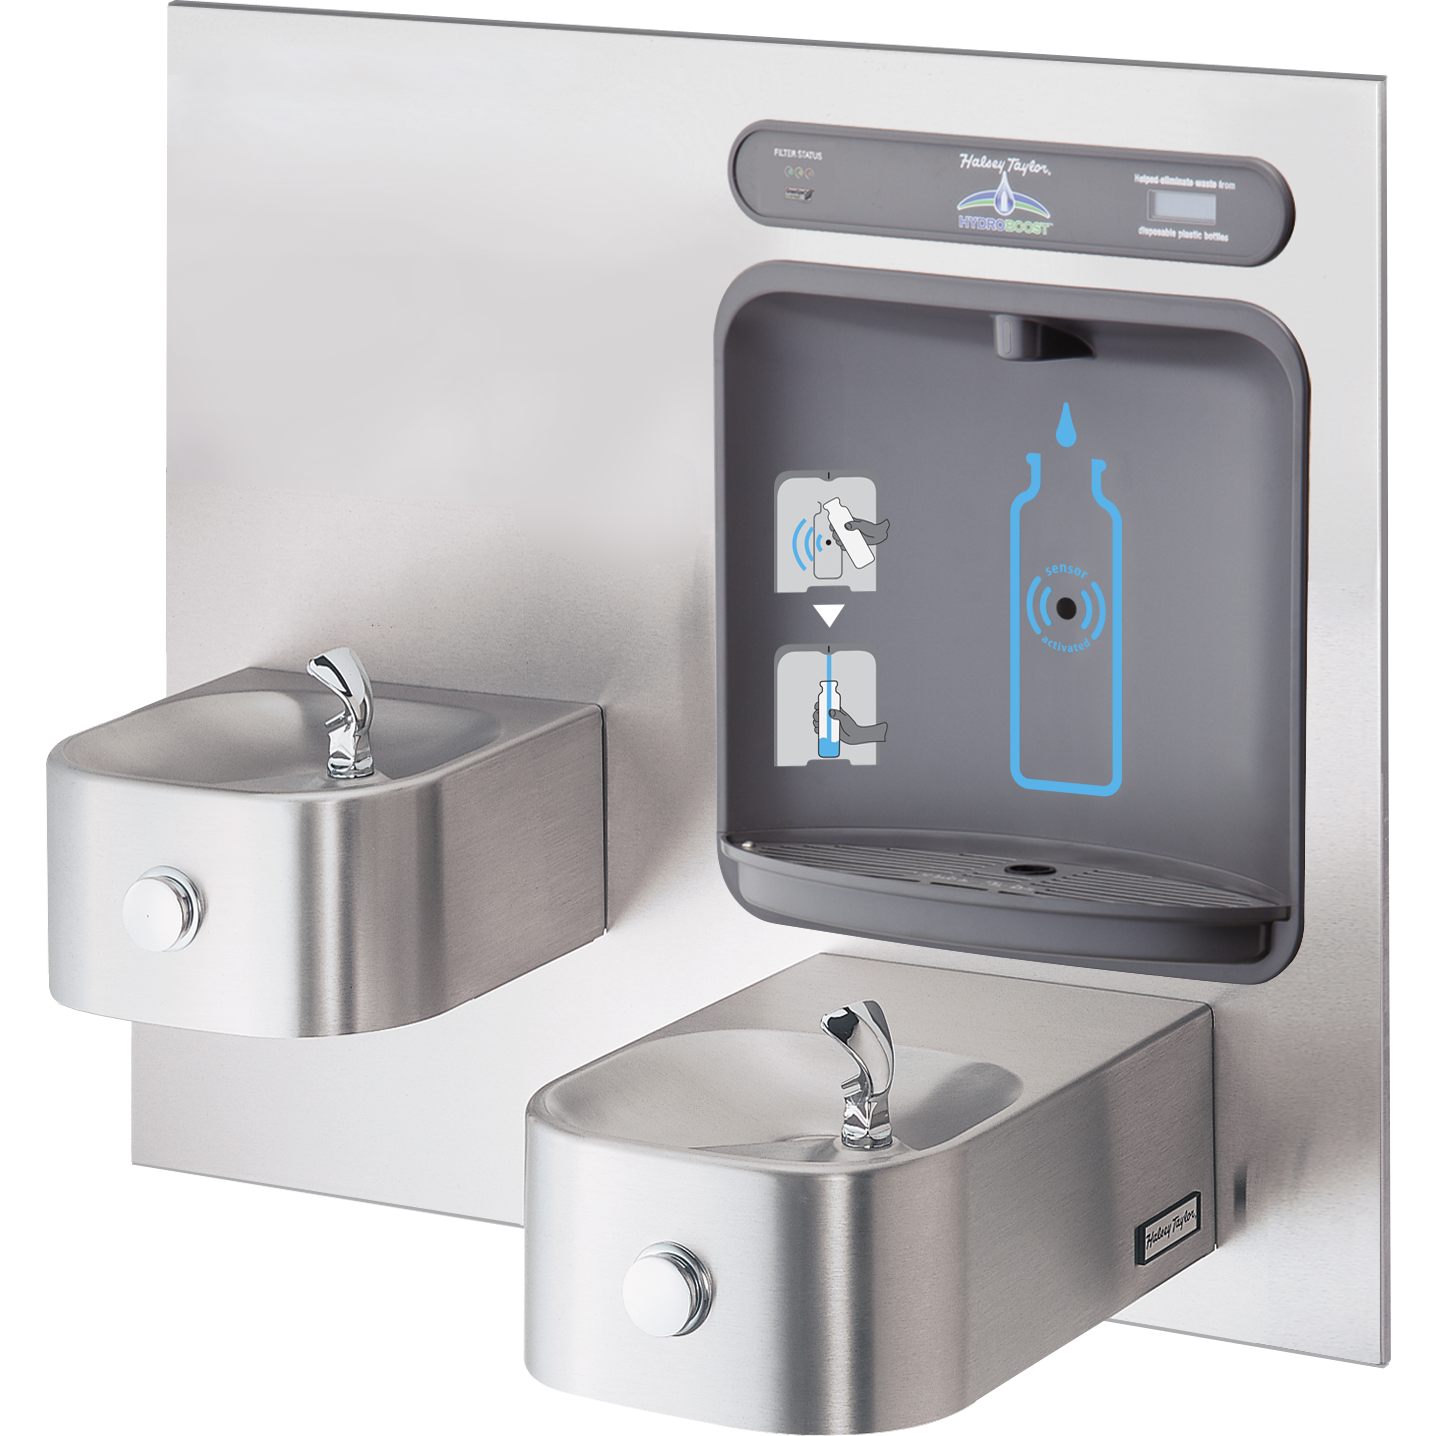 Halsey Taylor HTHBWF-HRFSEBP-I | In-wall Bi-level Bottle Filling Station | Filtered, Non-Refrigerated, Contour fountains